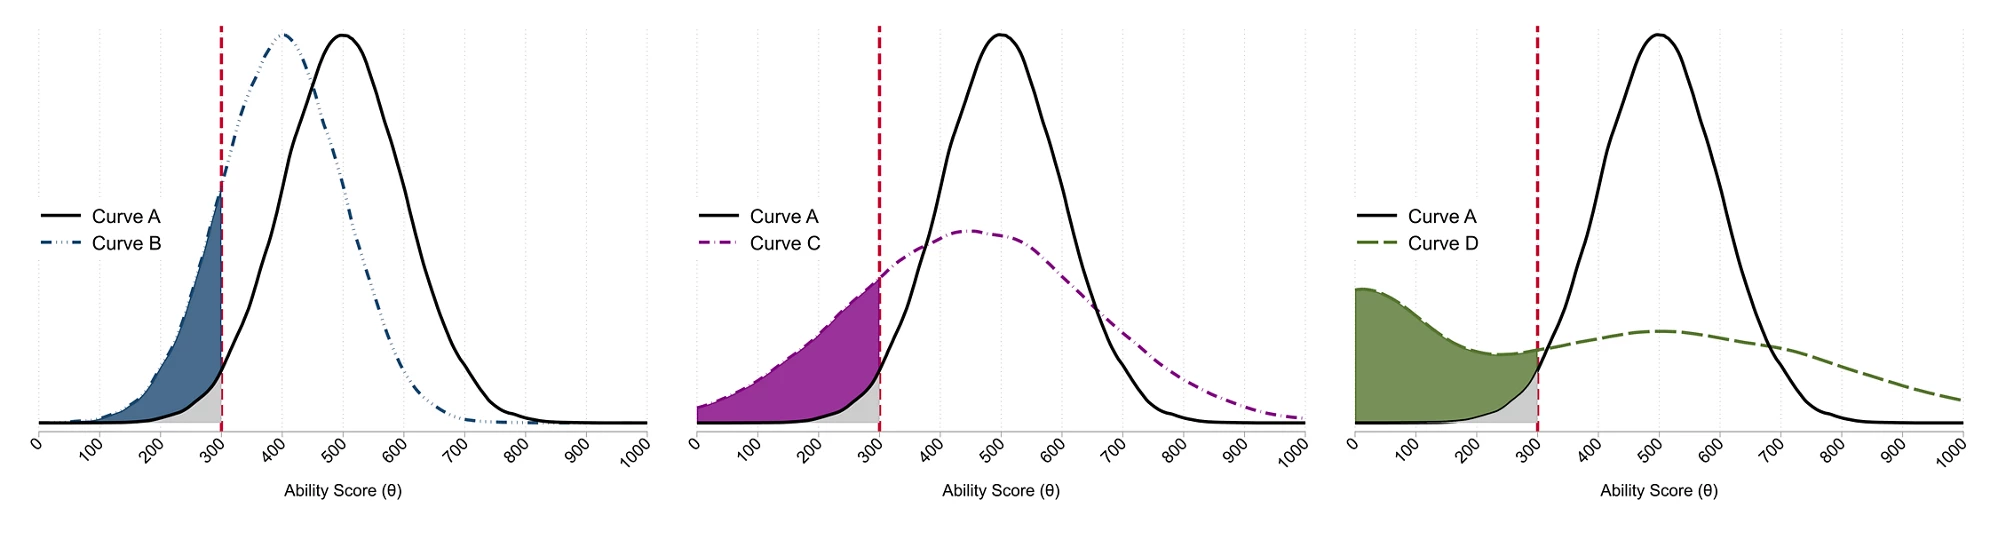 Figure 2 – Three possible scenarios of how the learning curve may evolve in the coming months: a lower average, a higher standard deviation, or a sharp increase in low learning at the bottom.